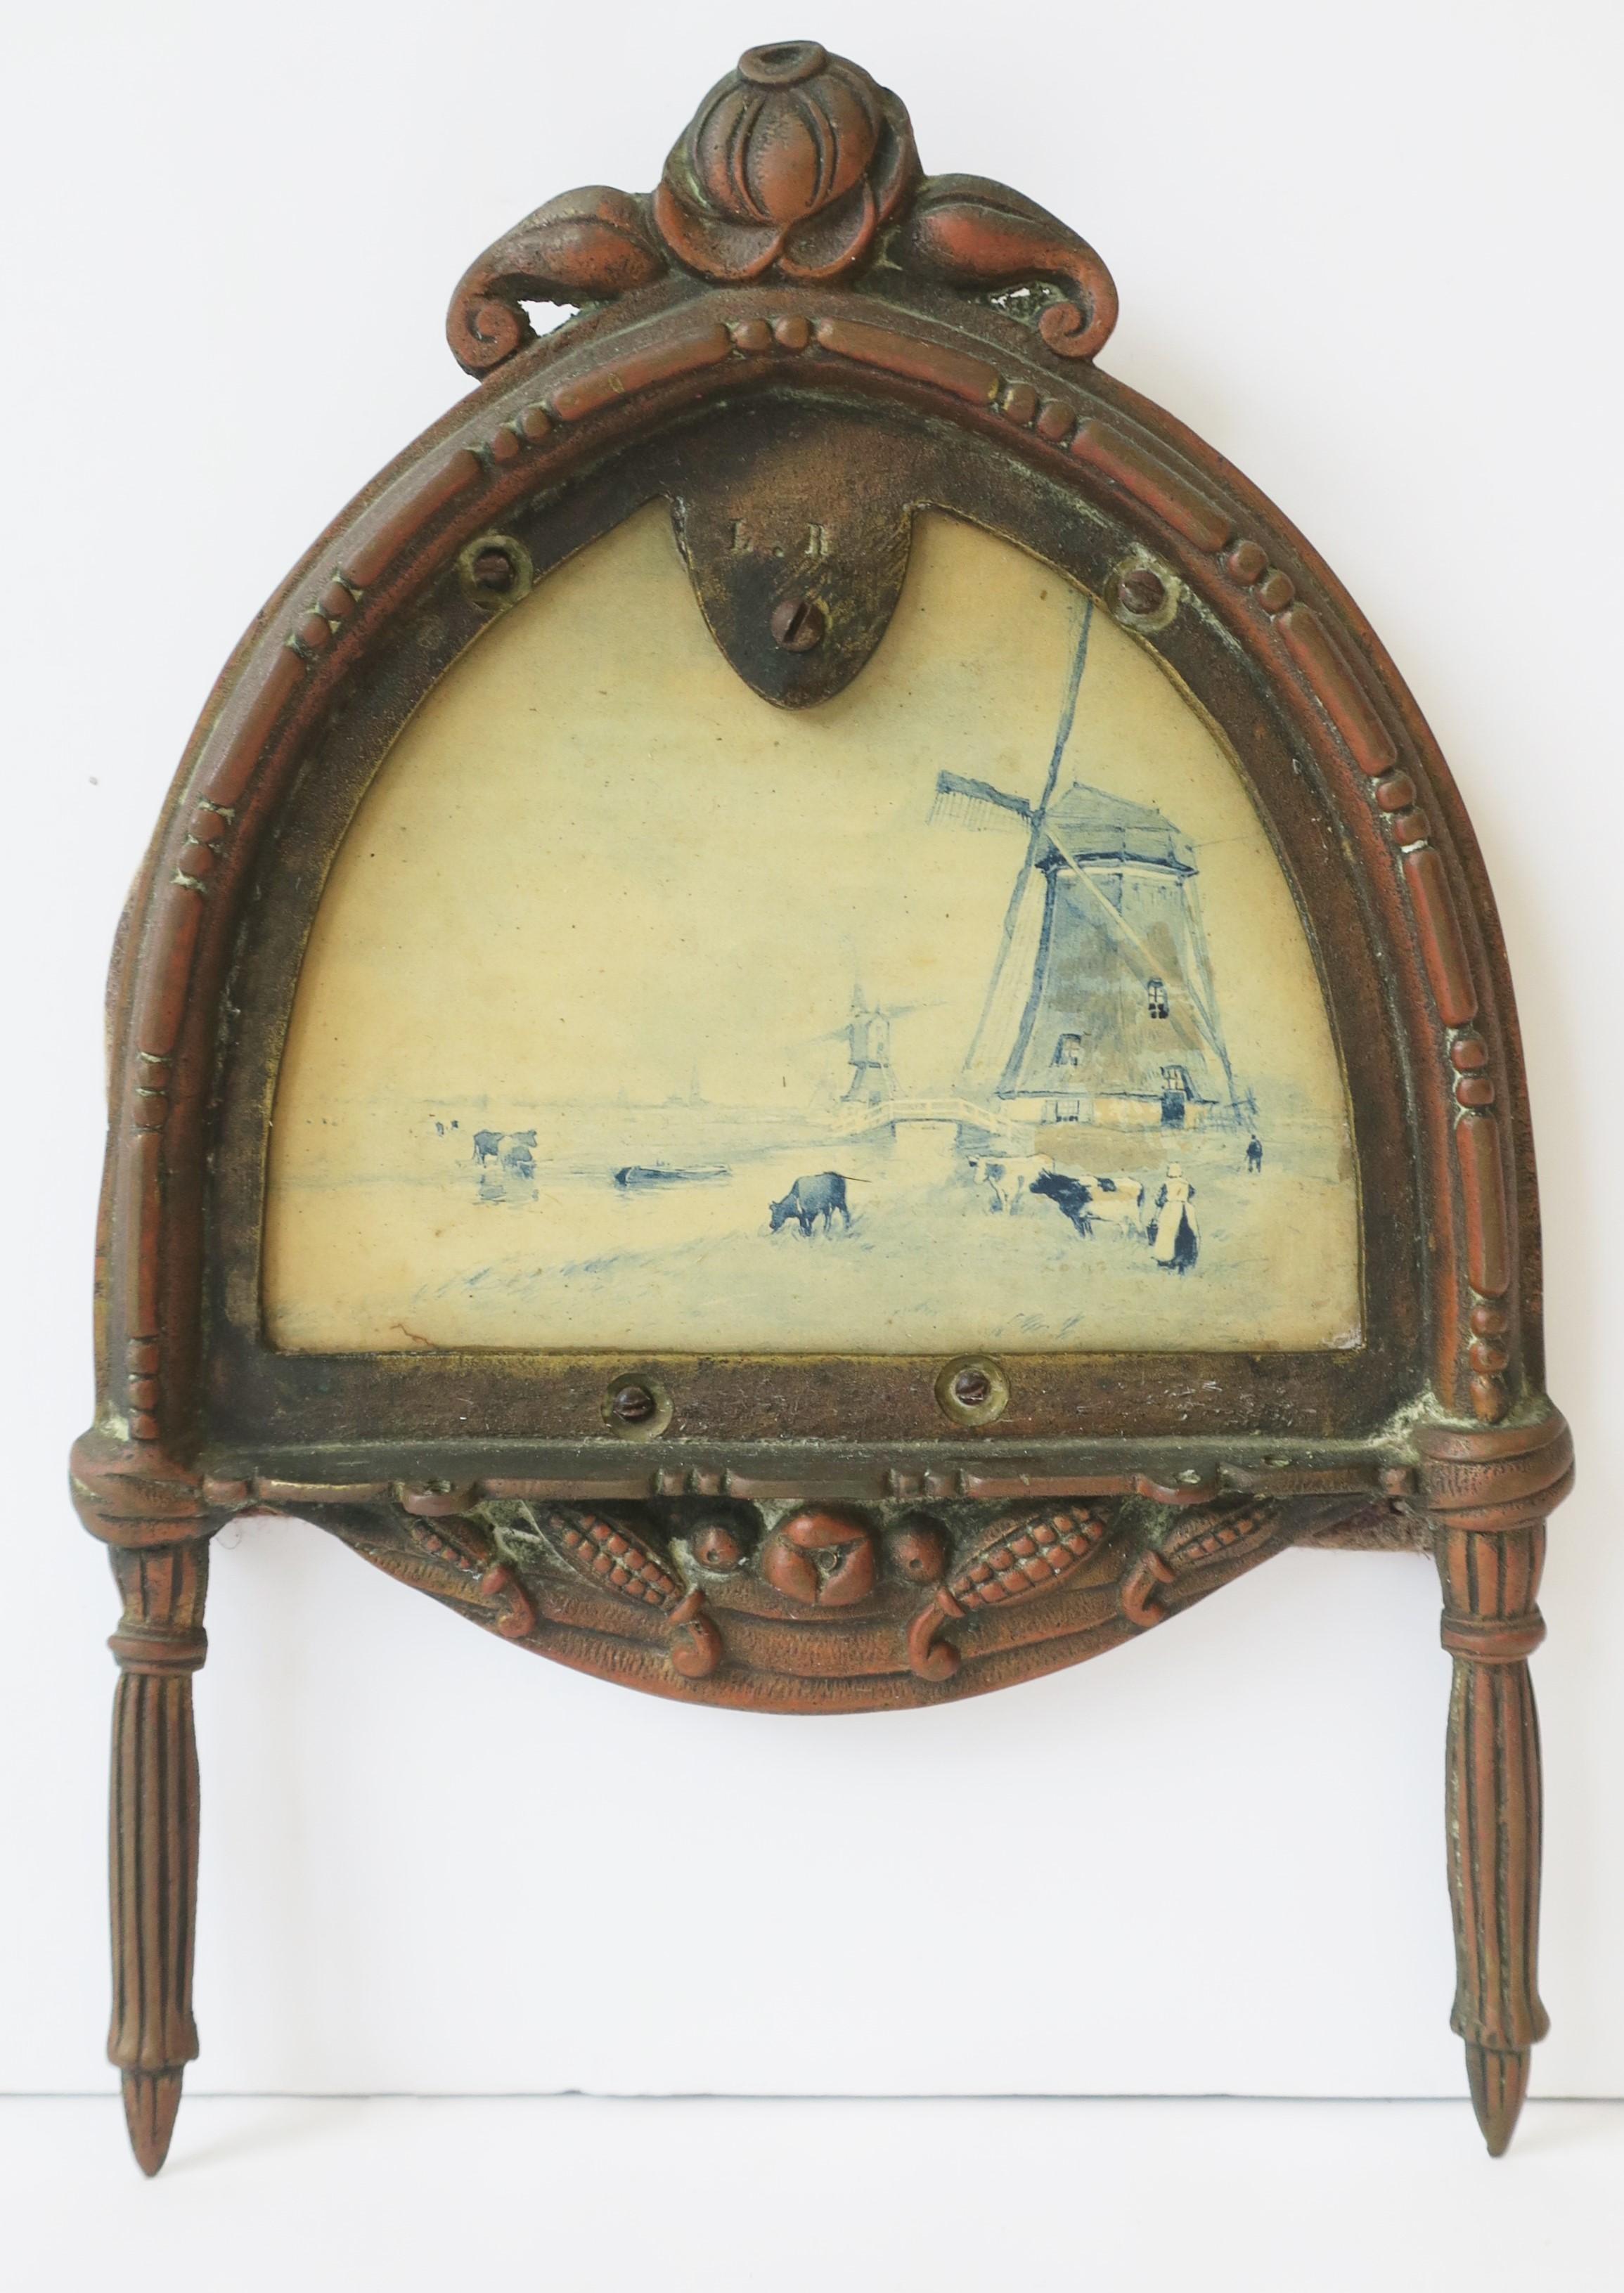 Copper Blue and White Dutch Holland Wall Art with Windmill and Farm Design For Sale